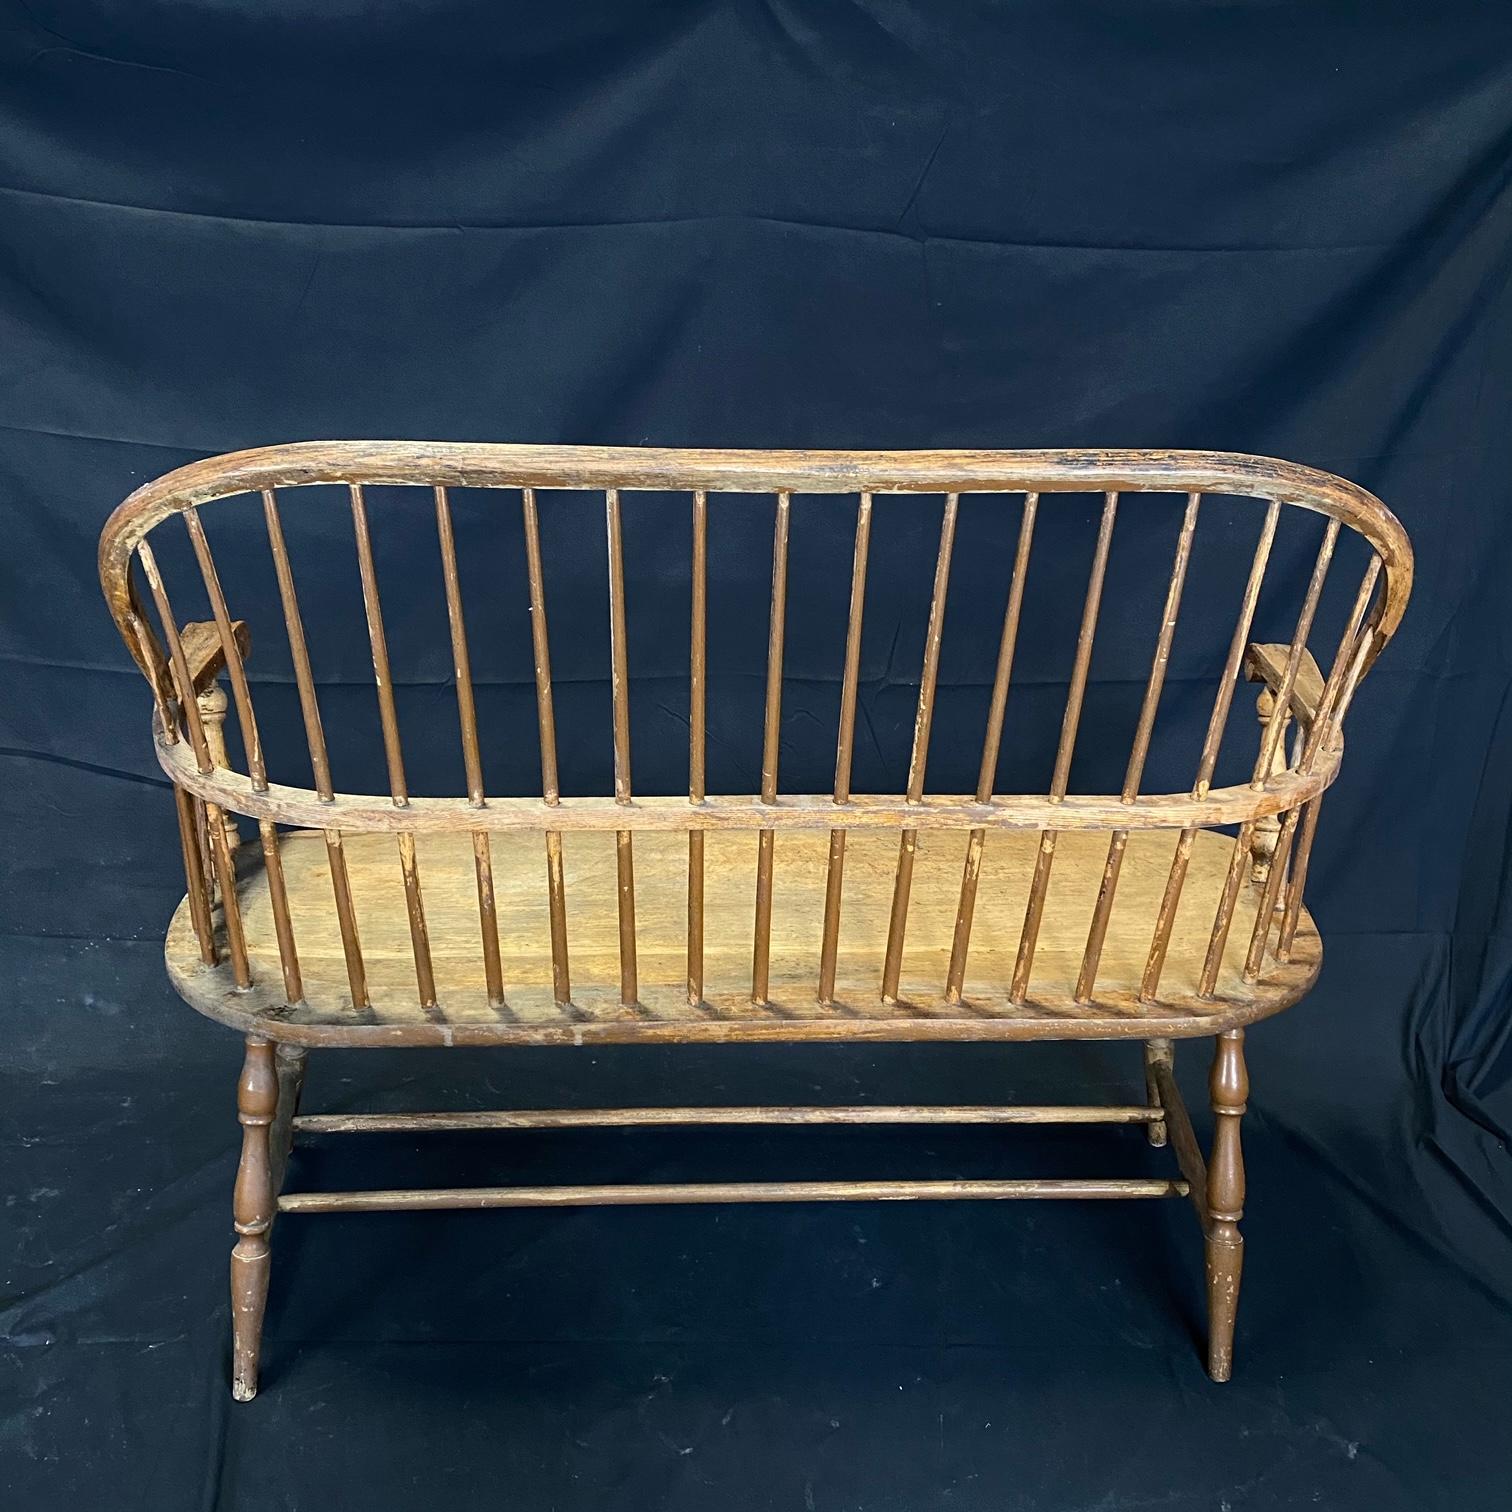 Classic Original Early Plank Seat Windsor Spindle Back Hoop Bench or Settee 1